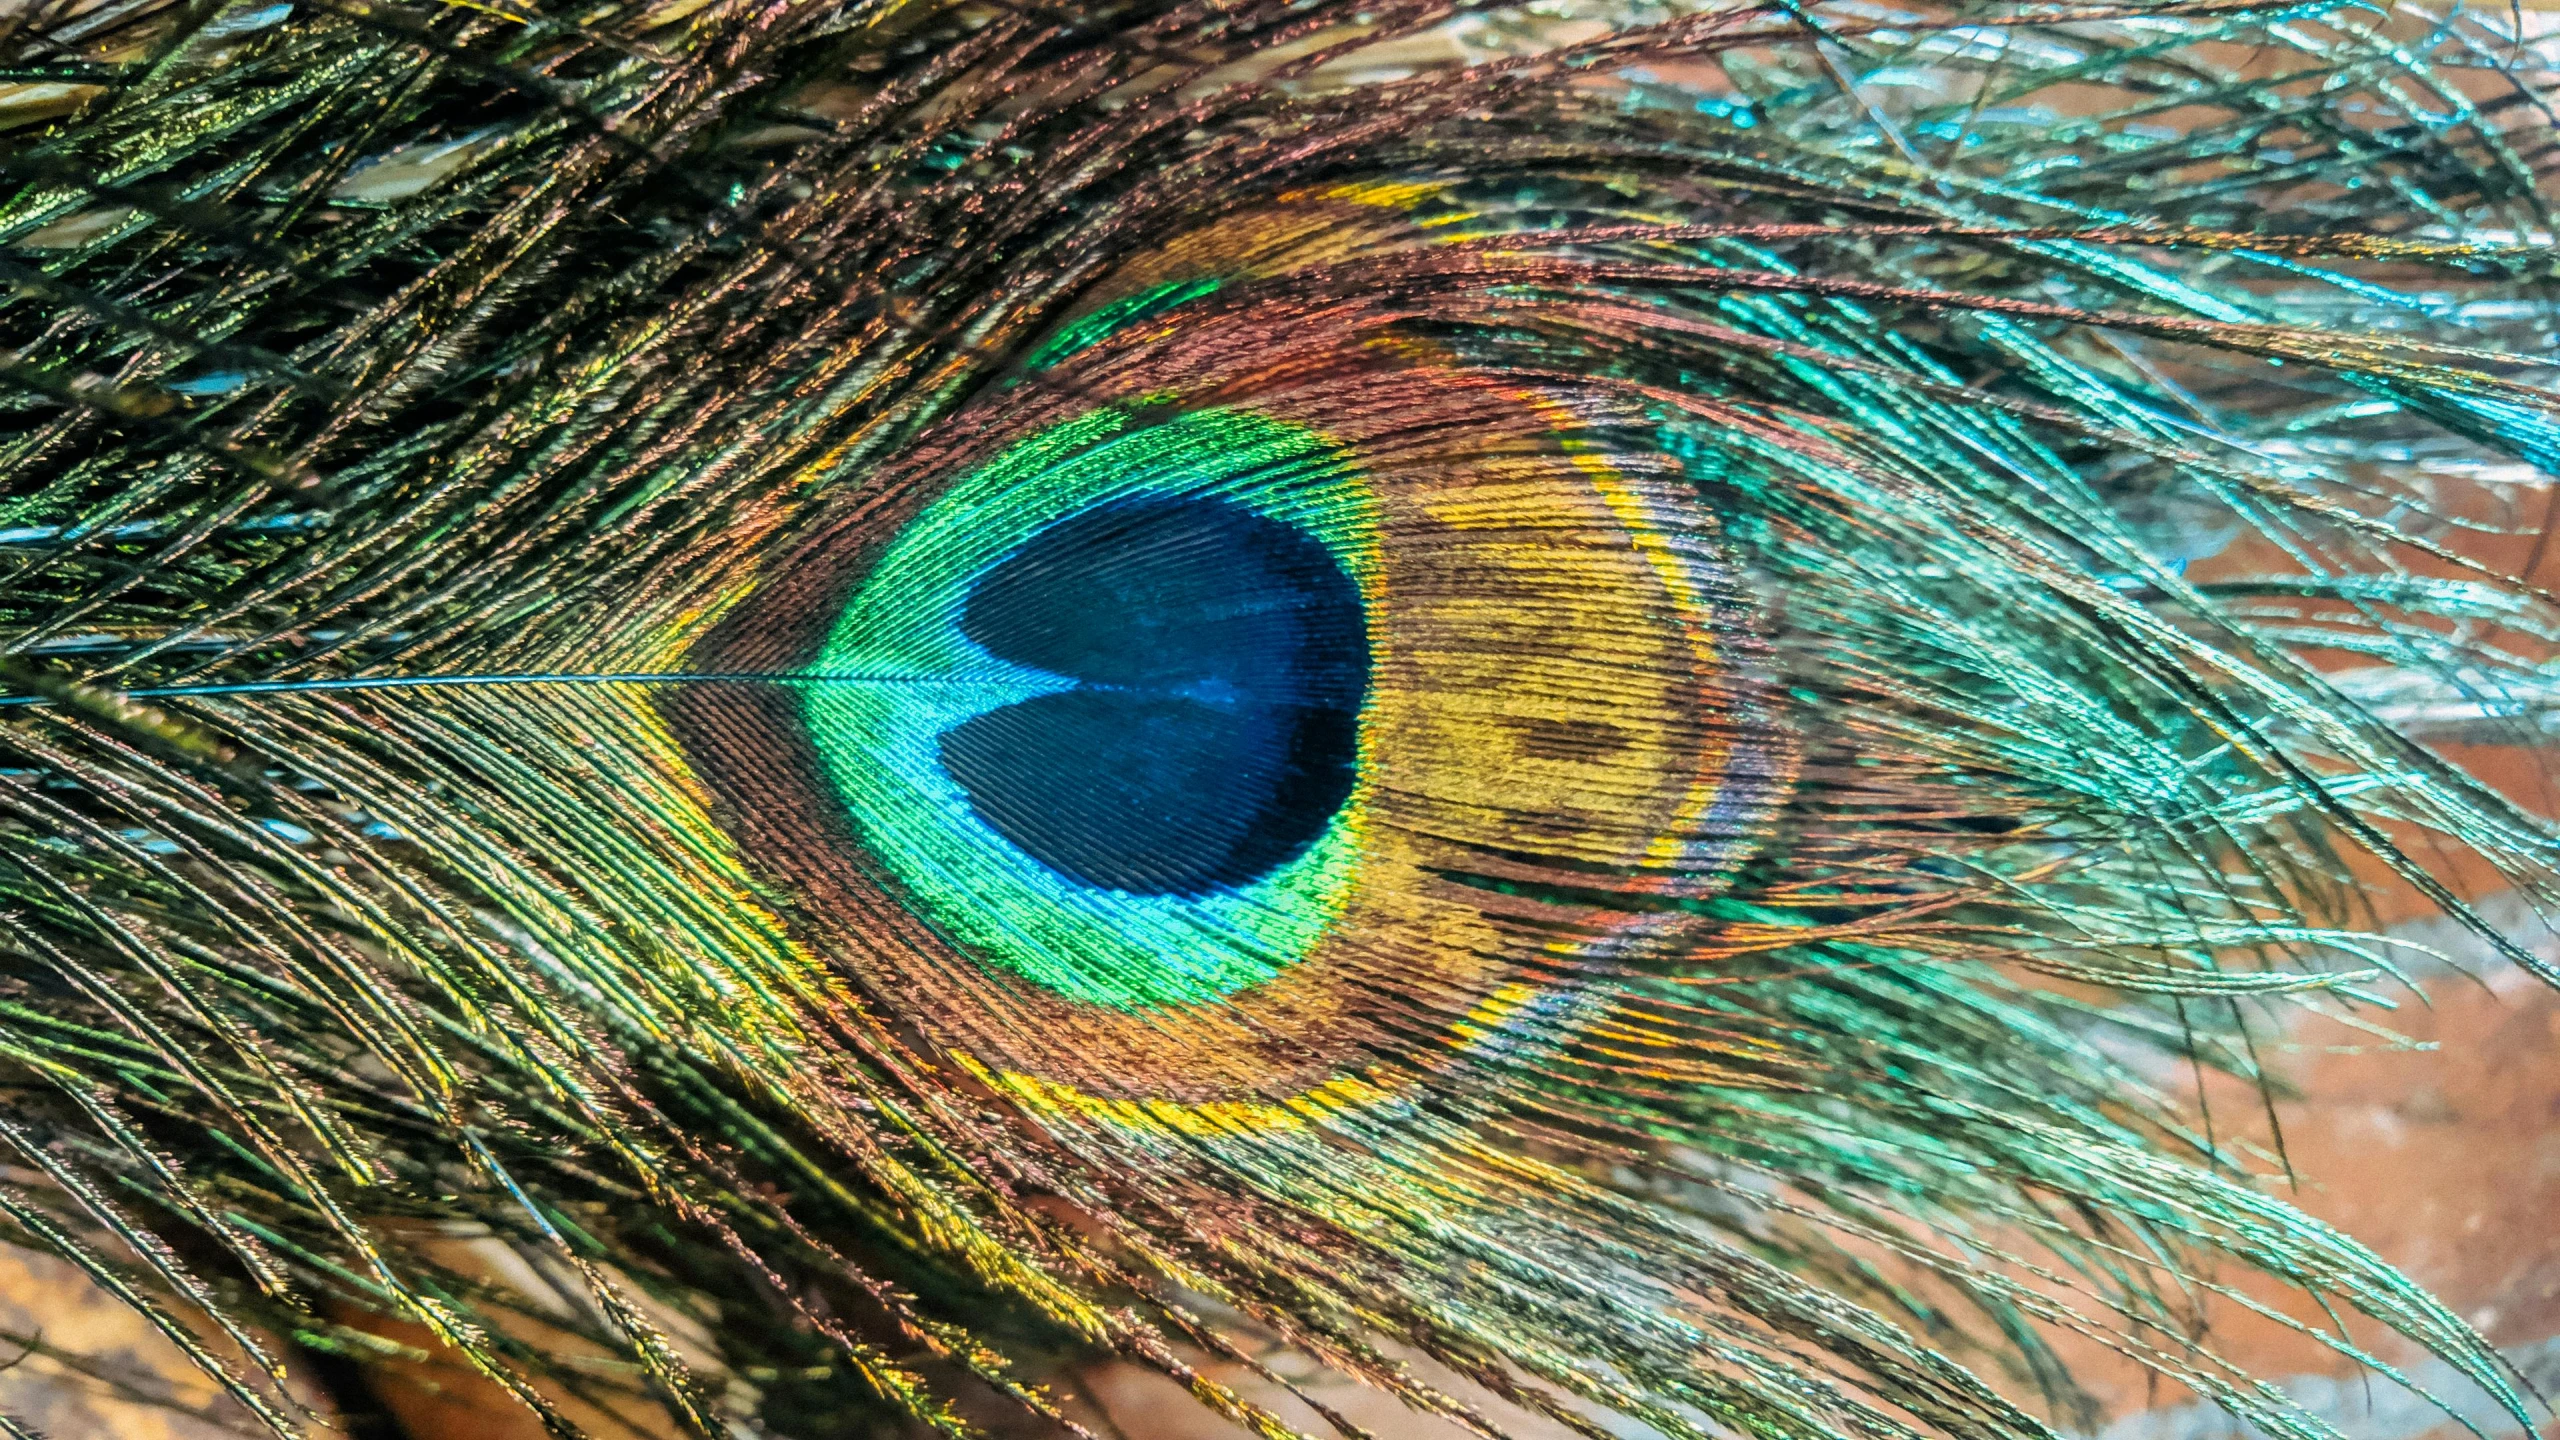 a close up view of a peacock's eye, trending on pexels, varied colors, bird\'s eye view, 3 - dimensional, in a medium full shot